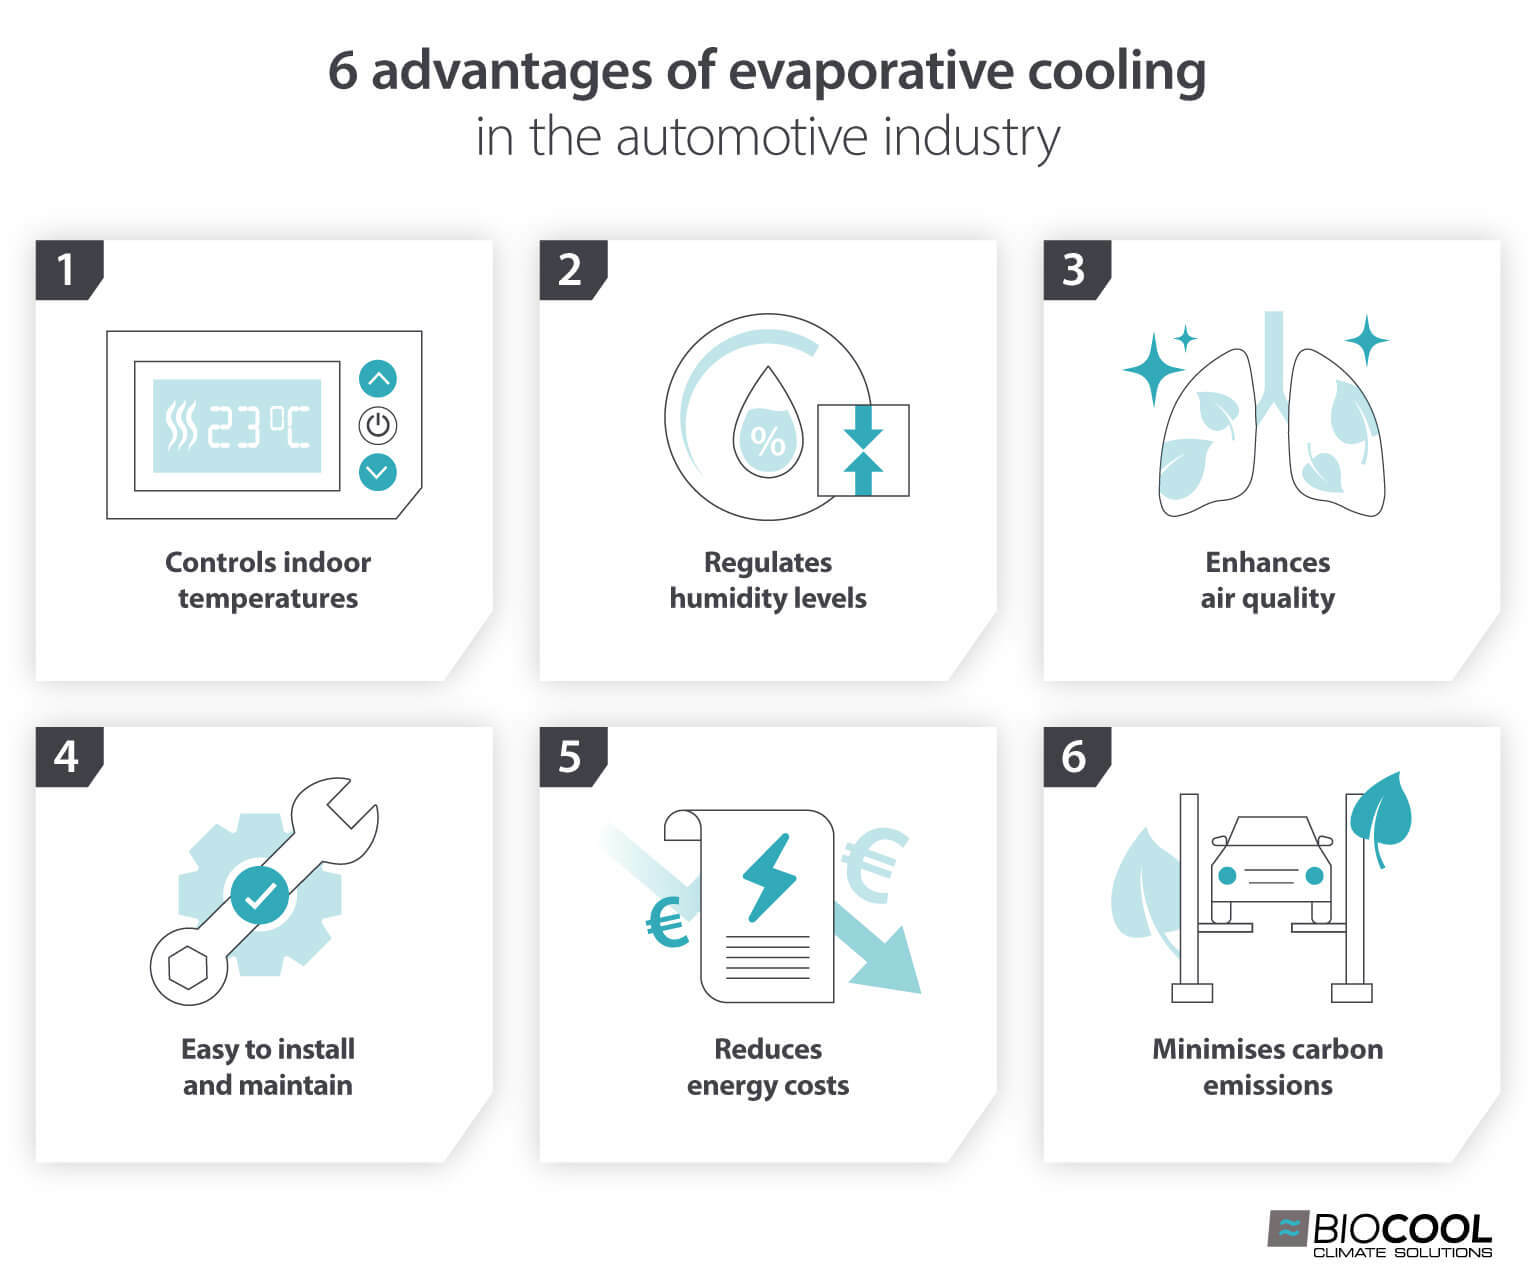 6 advantages of evaporative cooling in the automotive industry - Infographic image